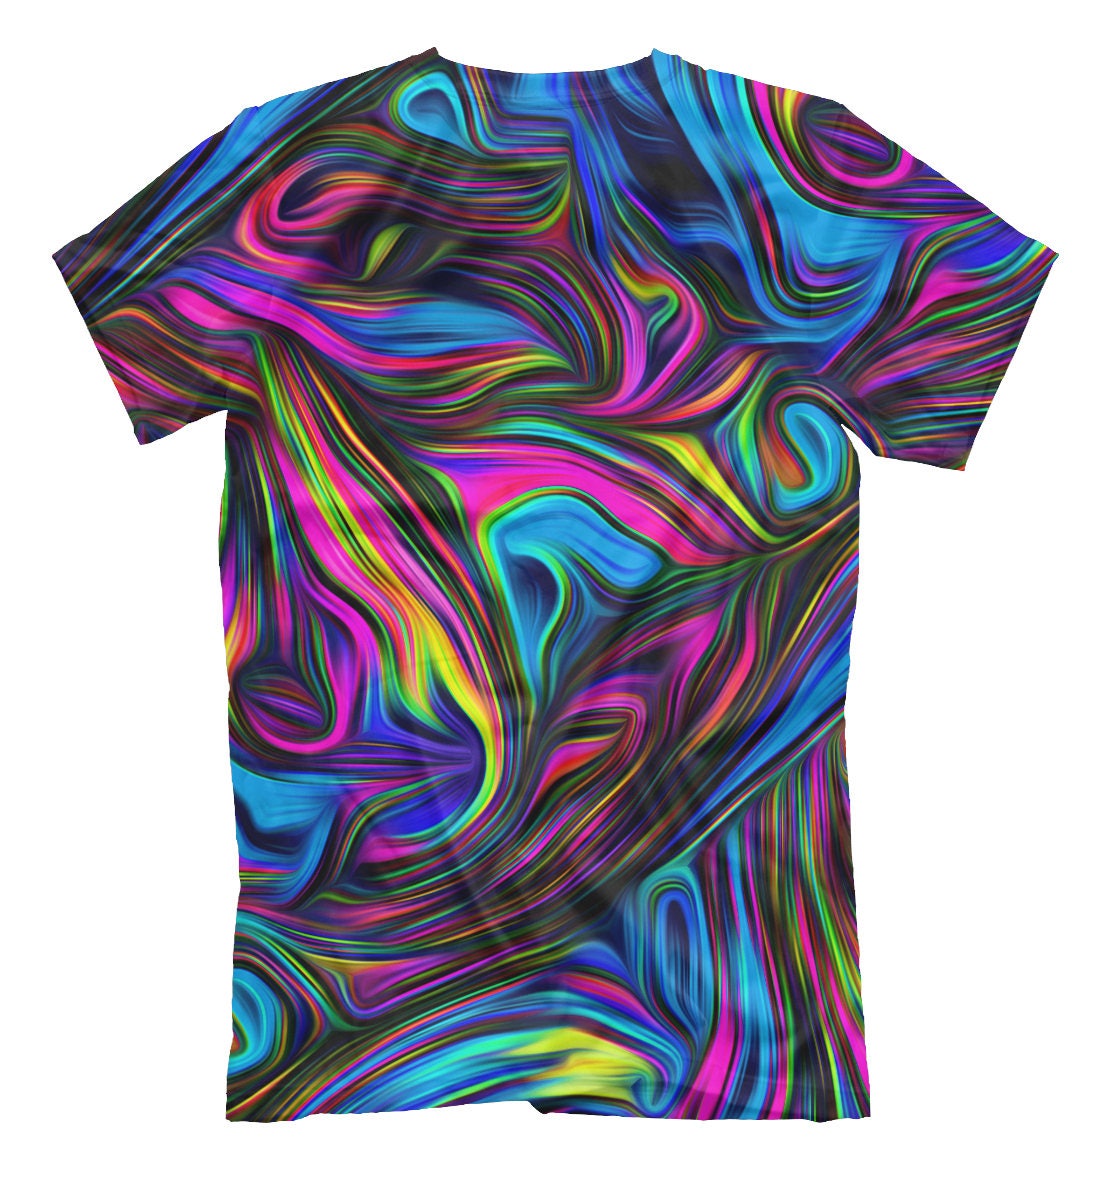 Acid 3d Waves T-shirt Bright Juice Colors Rave Tee Colorful | Etsy